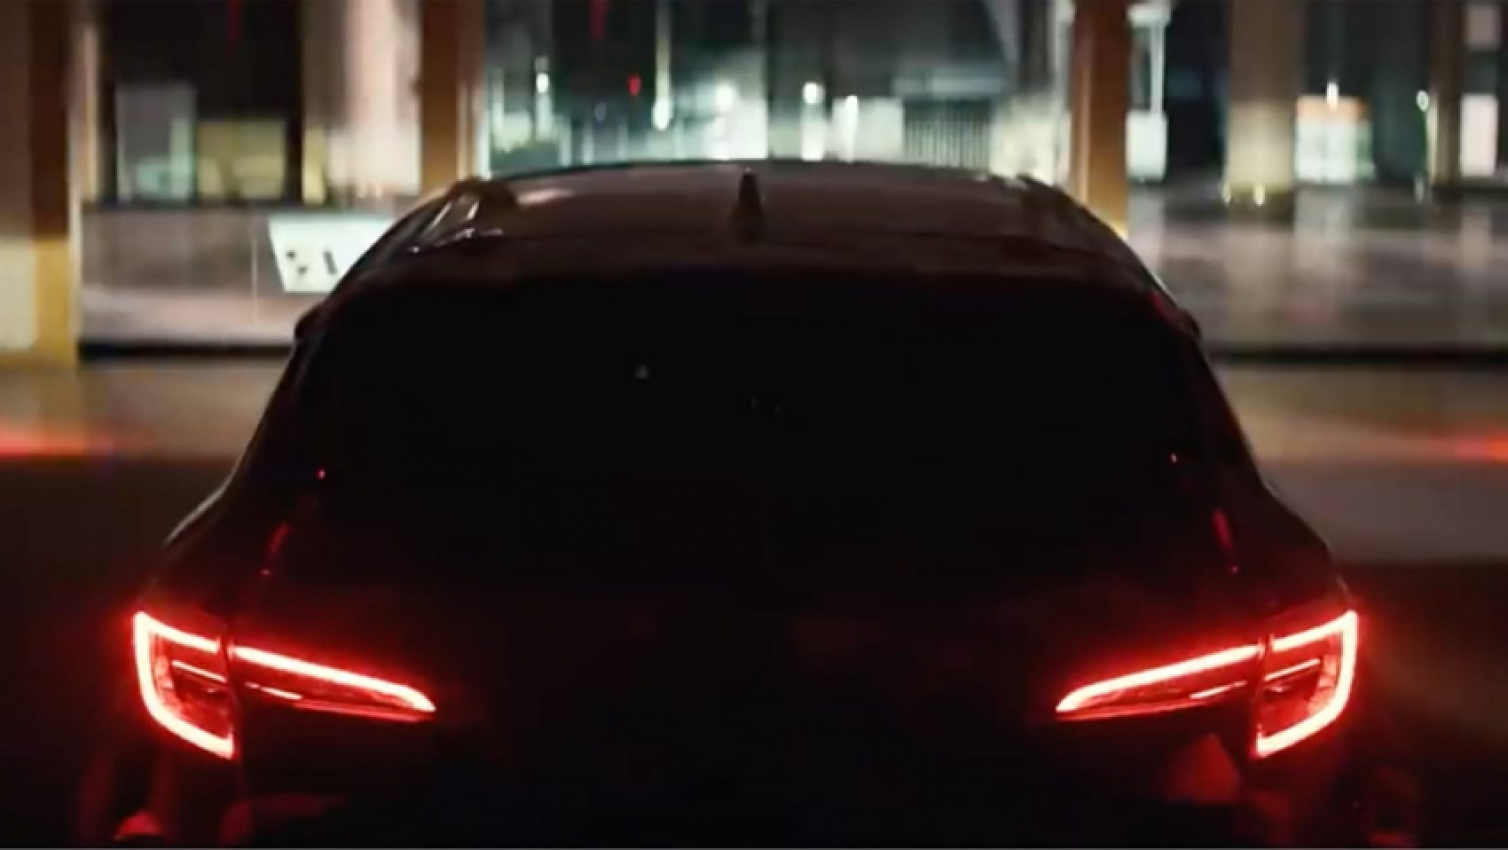 autos, cars, reviews, toyota, corolla, hot hatches, toyota gr corolla: new hot hatch spotted in teaser video